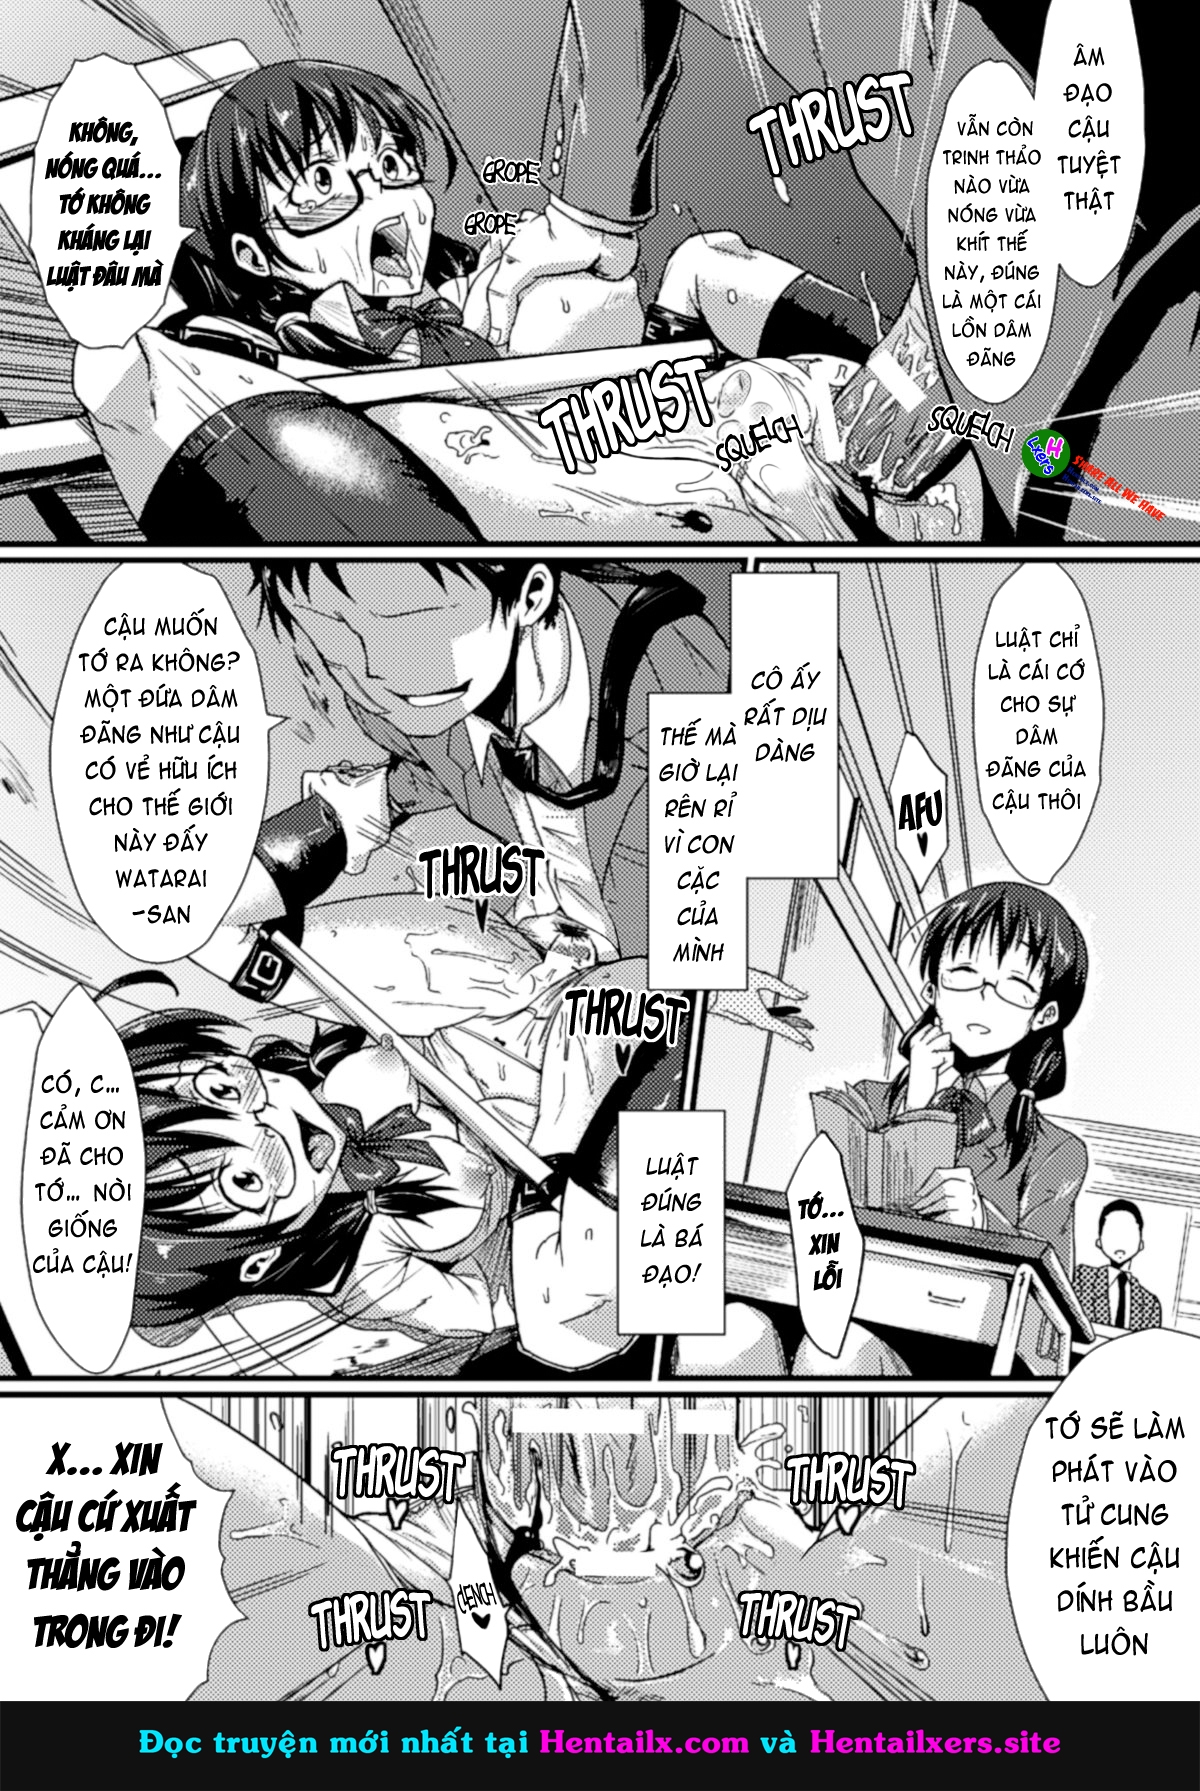 Xem ảnh Drop Out - Chapter 9 END - 1606921450365_0 - Hentai24h.Tv